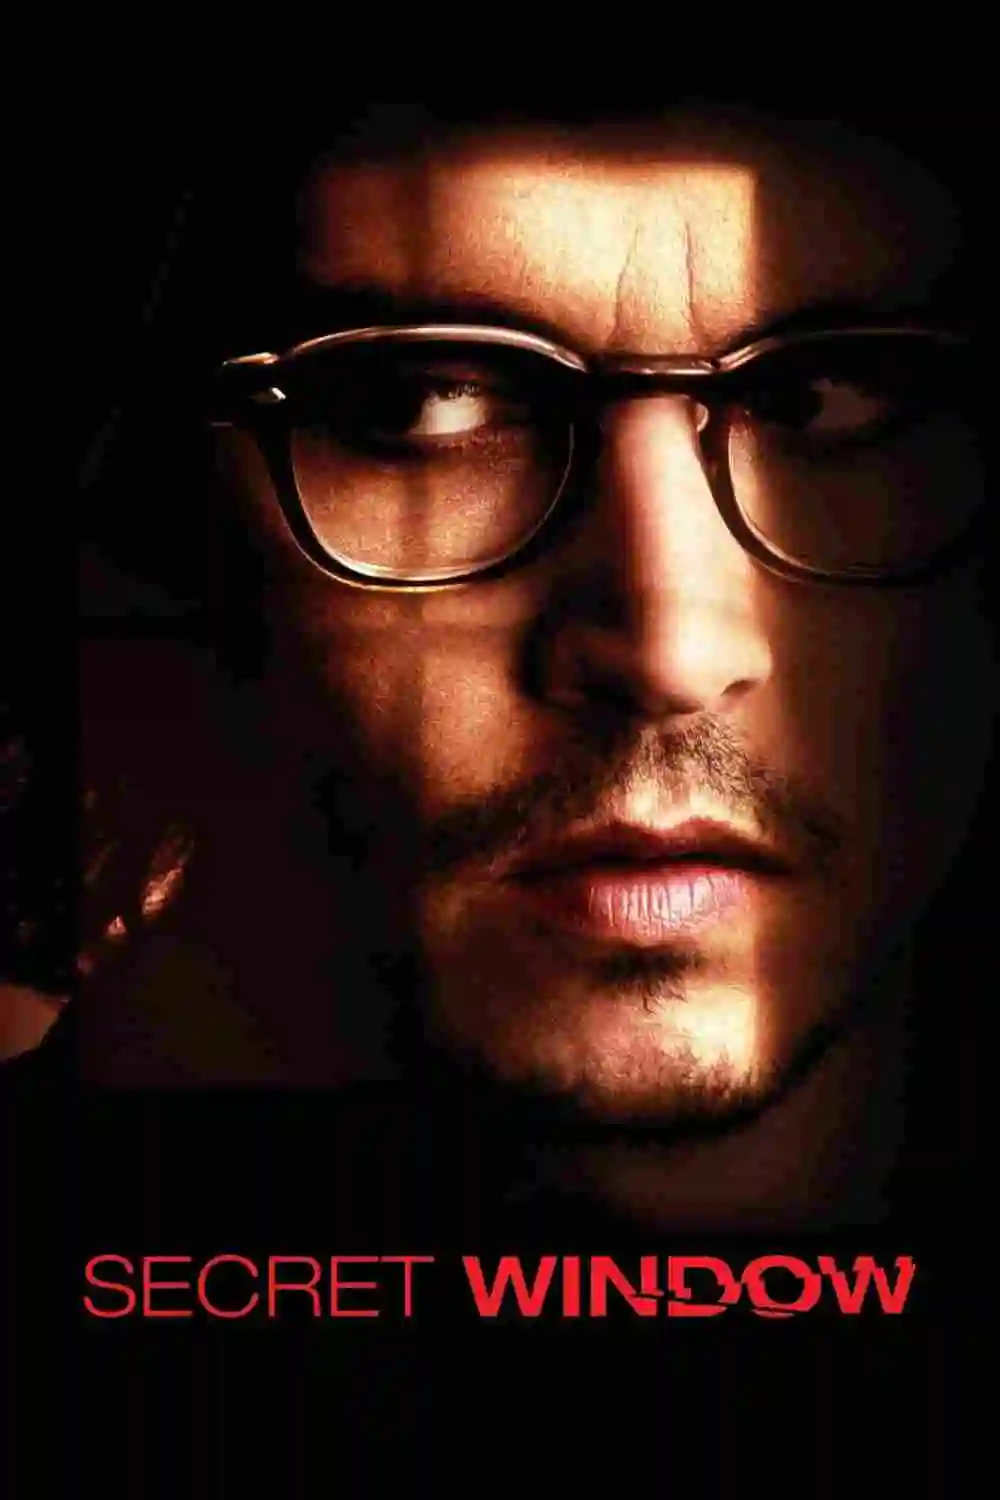 Secret Window (2004) BluRay Dual Audio [Hindi And English] Hollywood Hindi Dubbed Full Movie Download In Hd